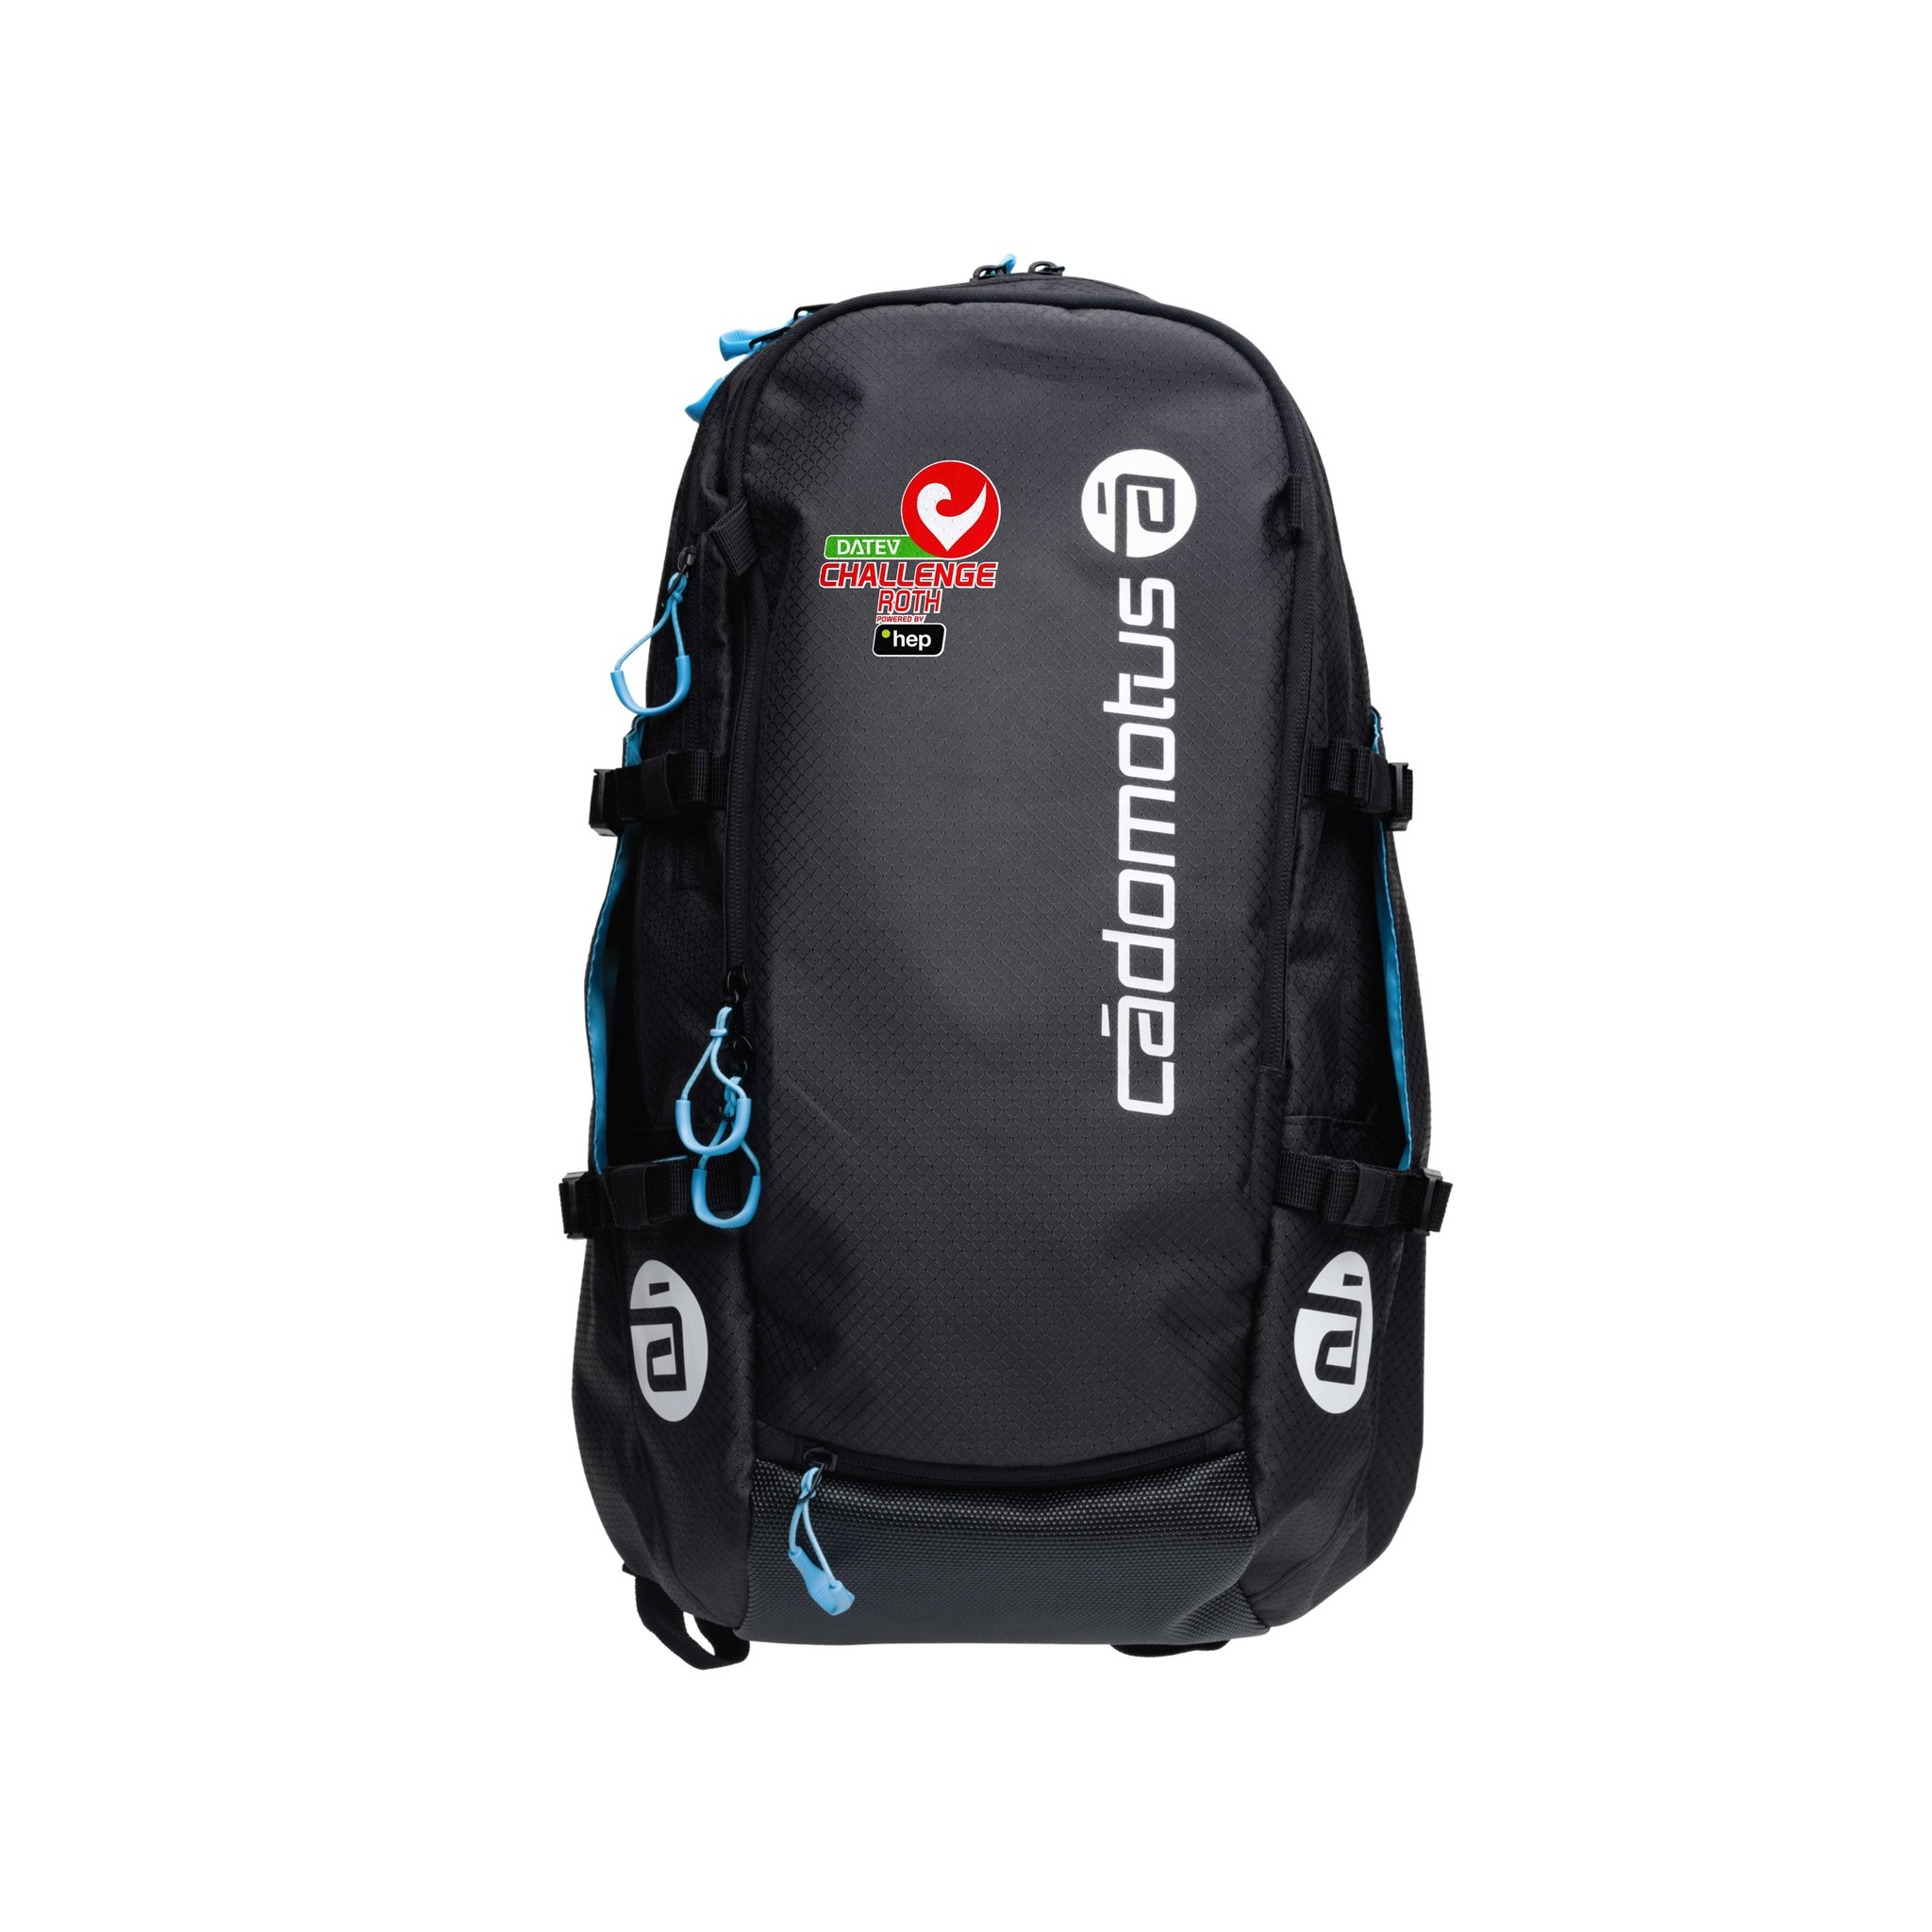 Cádomotus Airflow 2.0 Every Day Training Backpack XL - Challenge Roth Edition